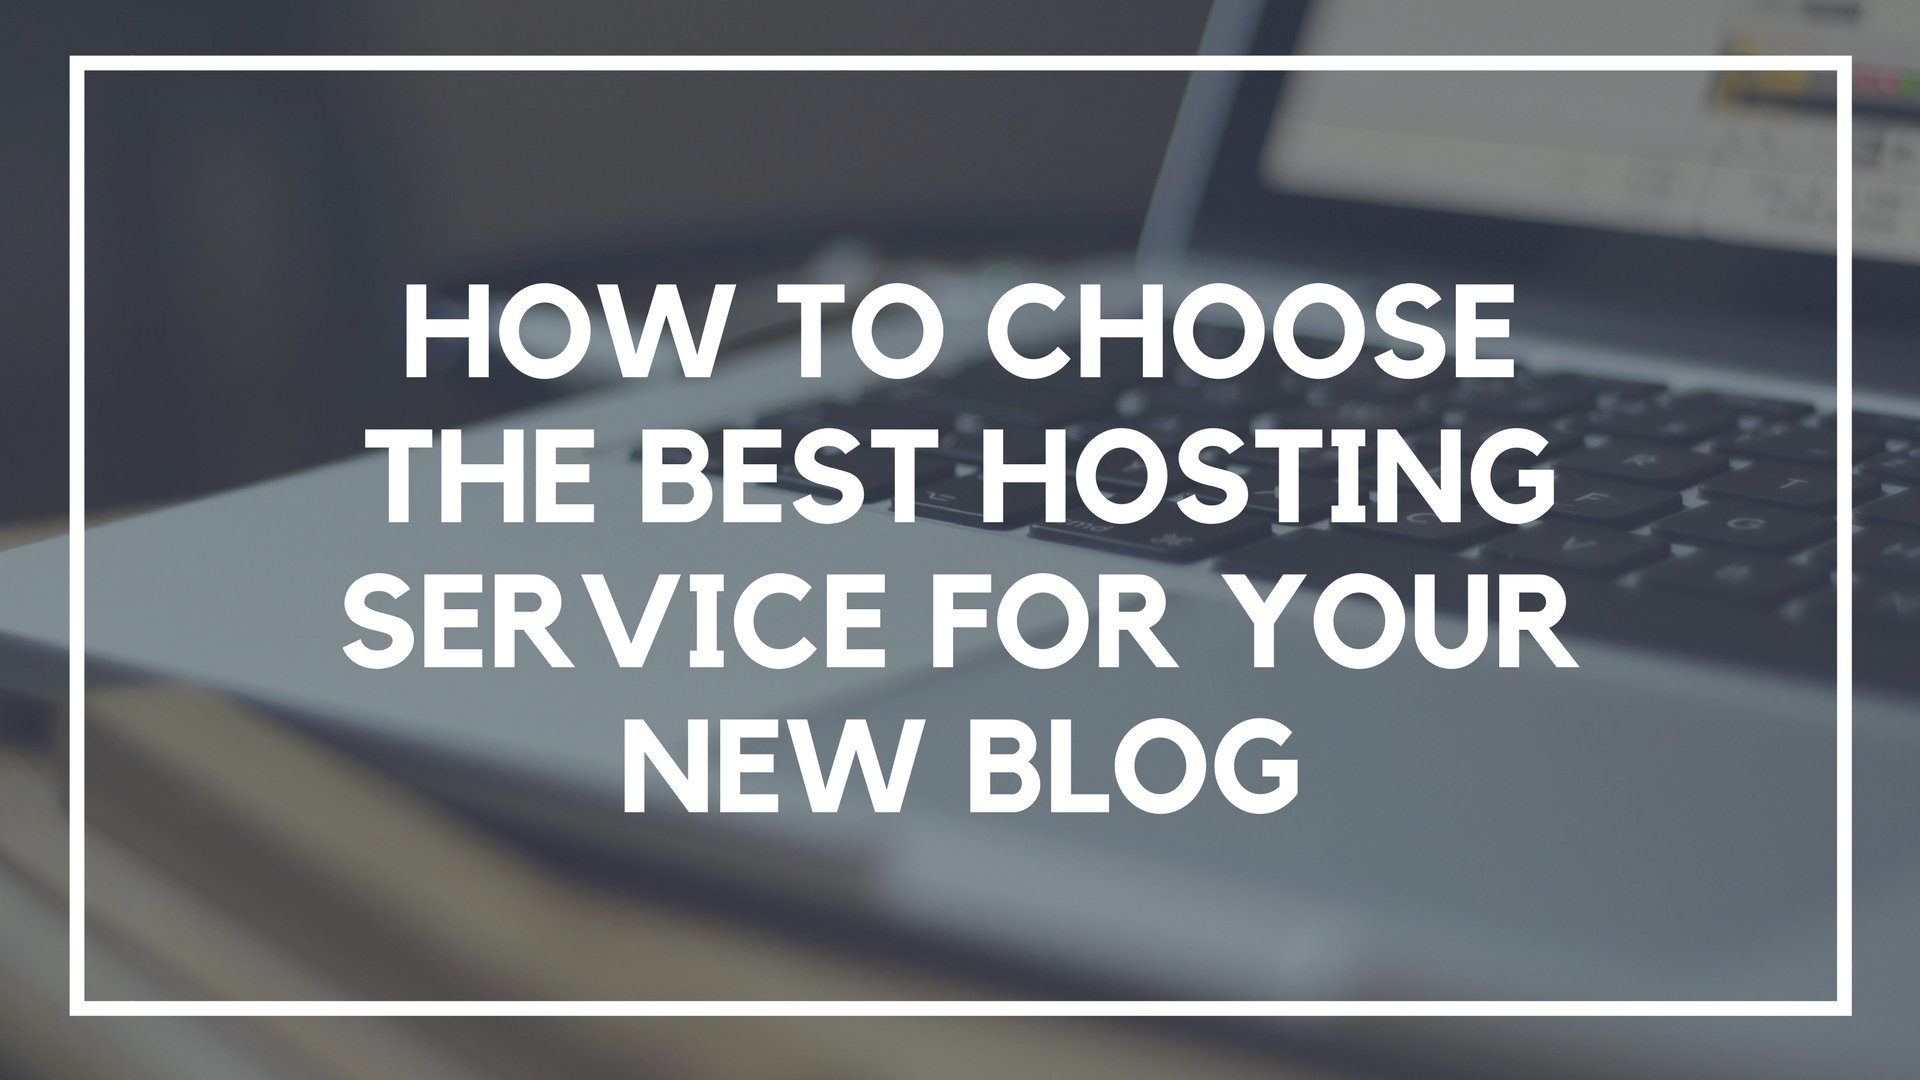 How to Choose the Best Hosting Service for Your New Blog in 2021